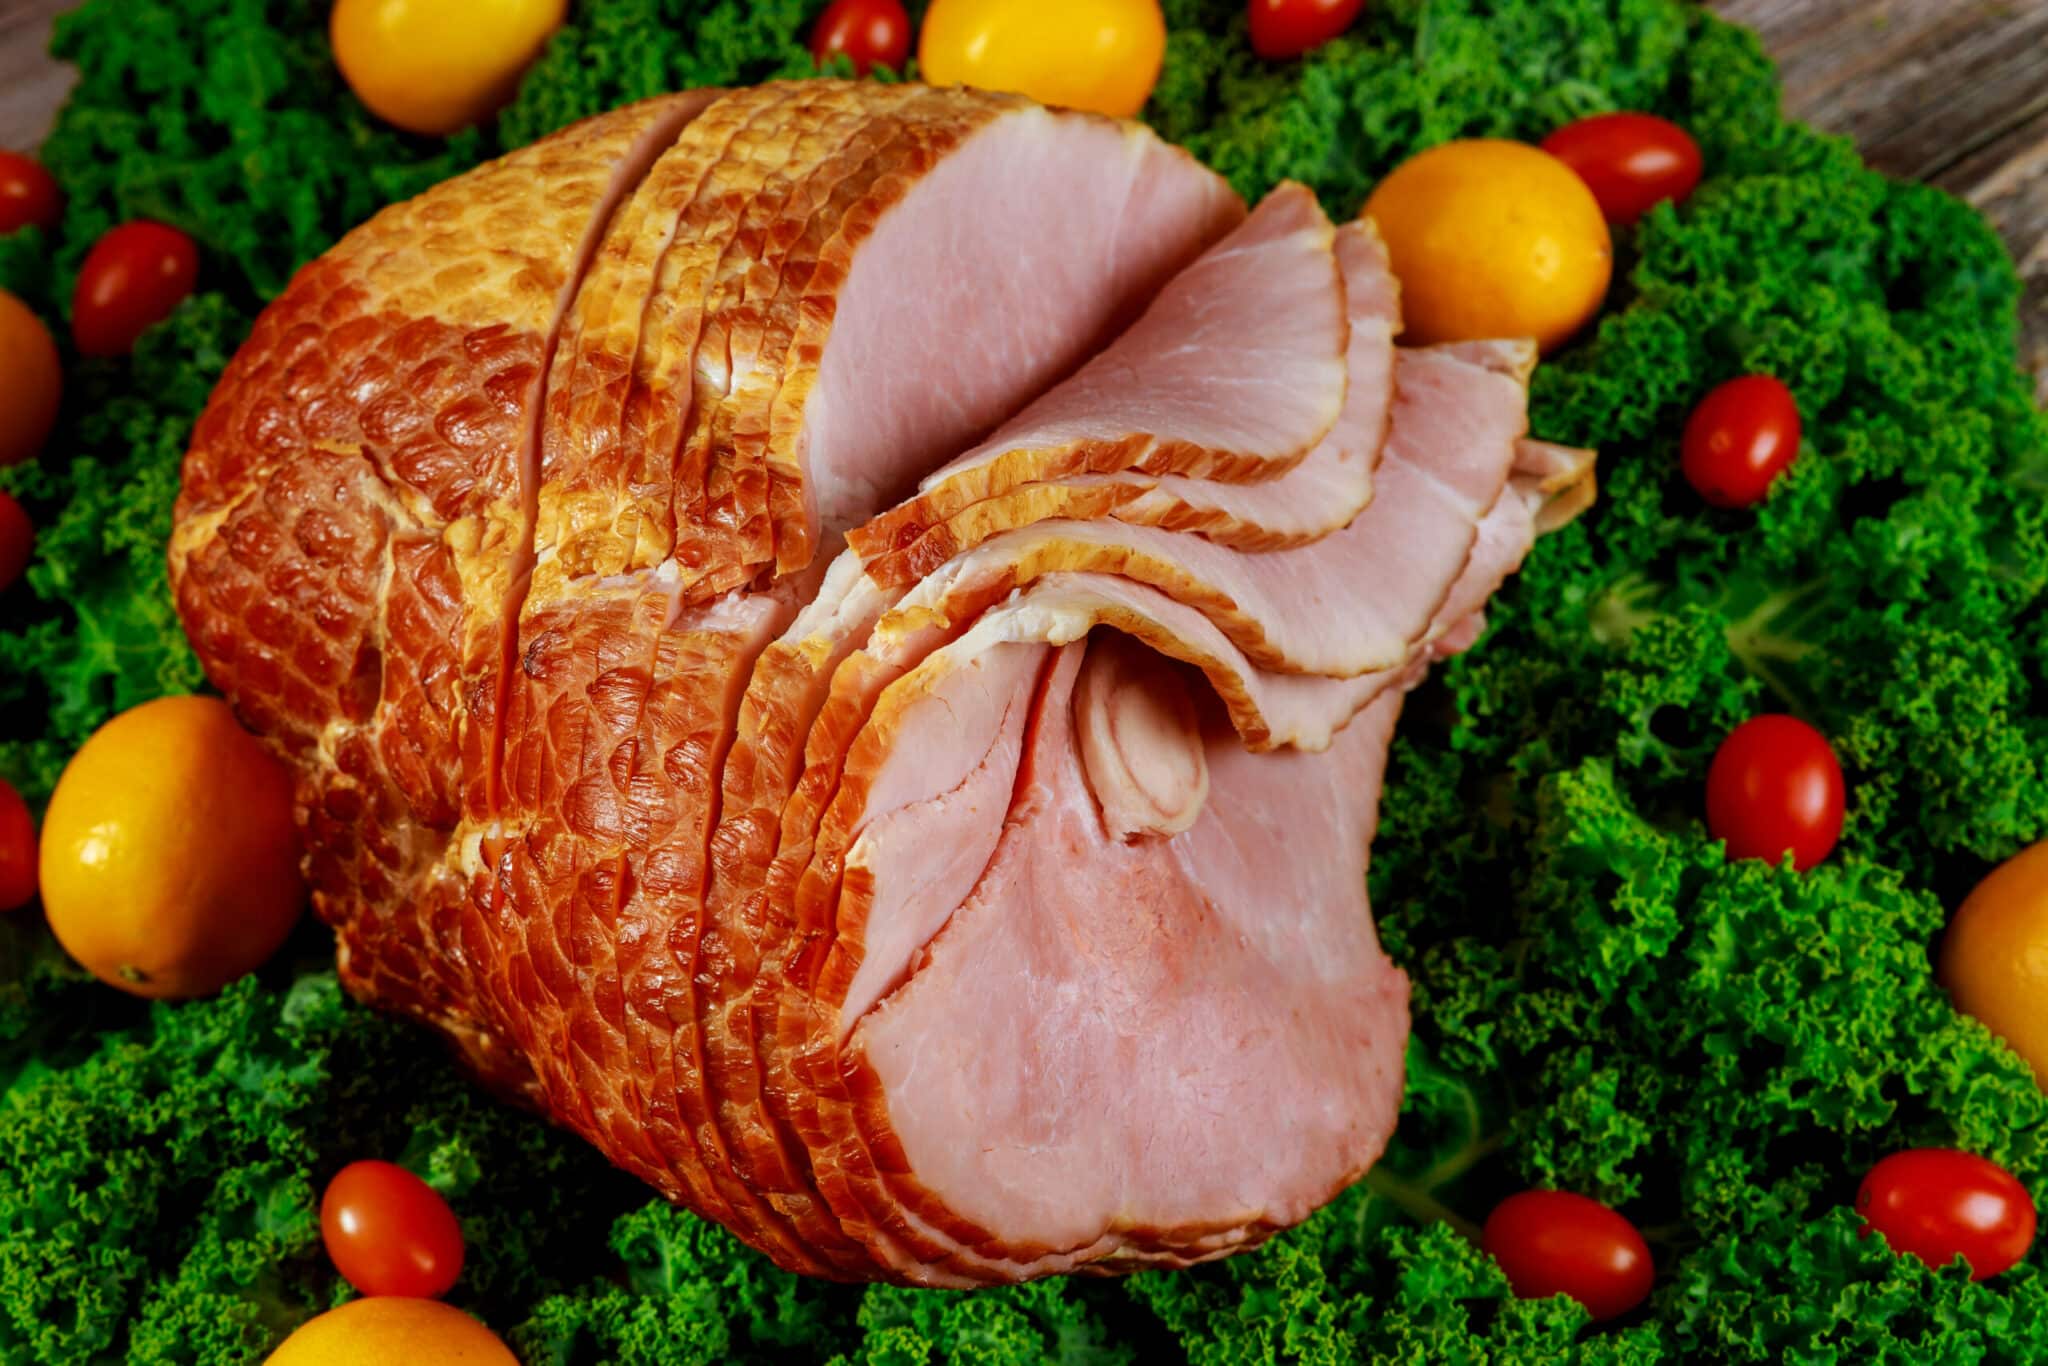 How Long Does A Spiral Ham Take To Cook